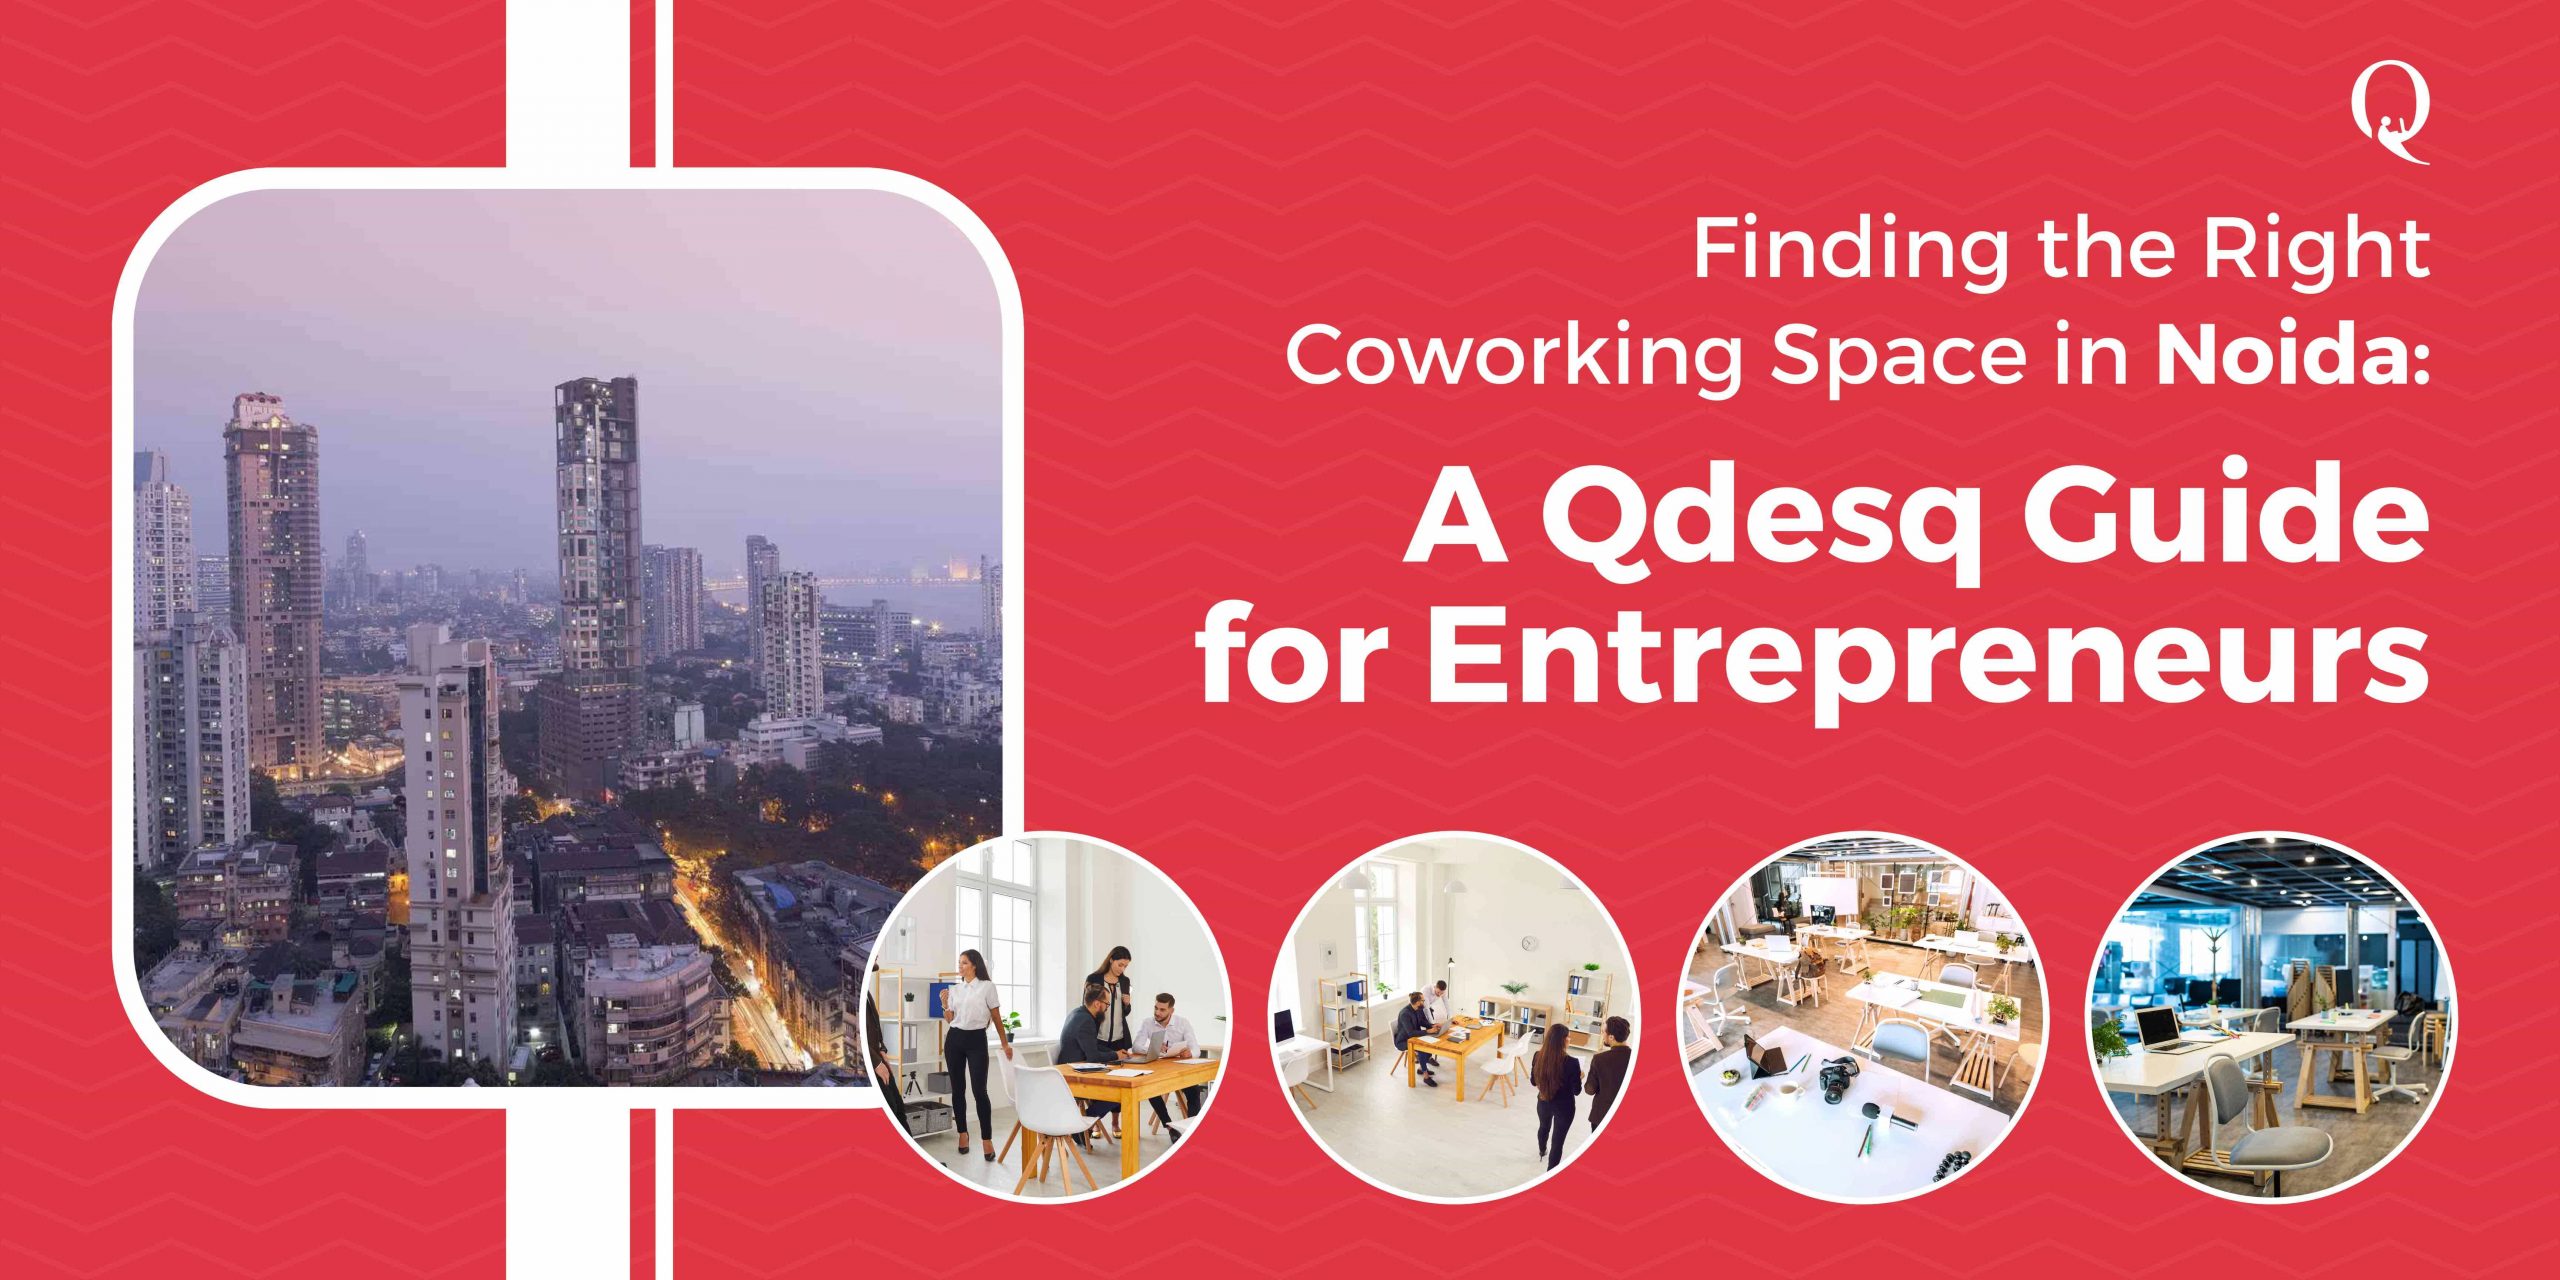 Finding the Right Coworking Space in Noida